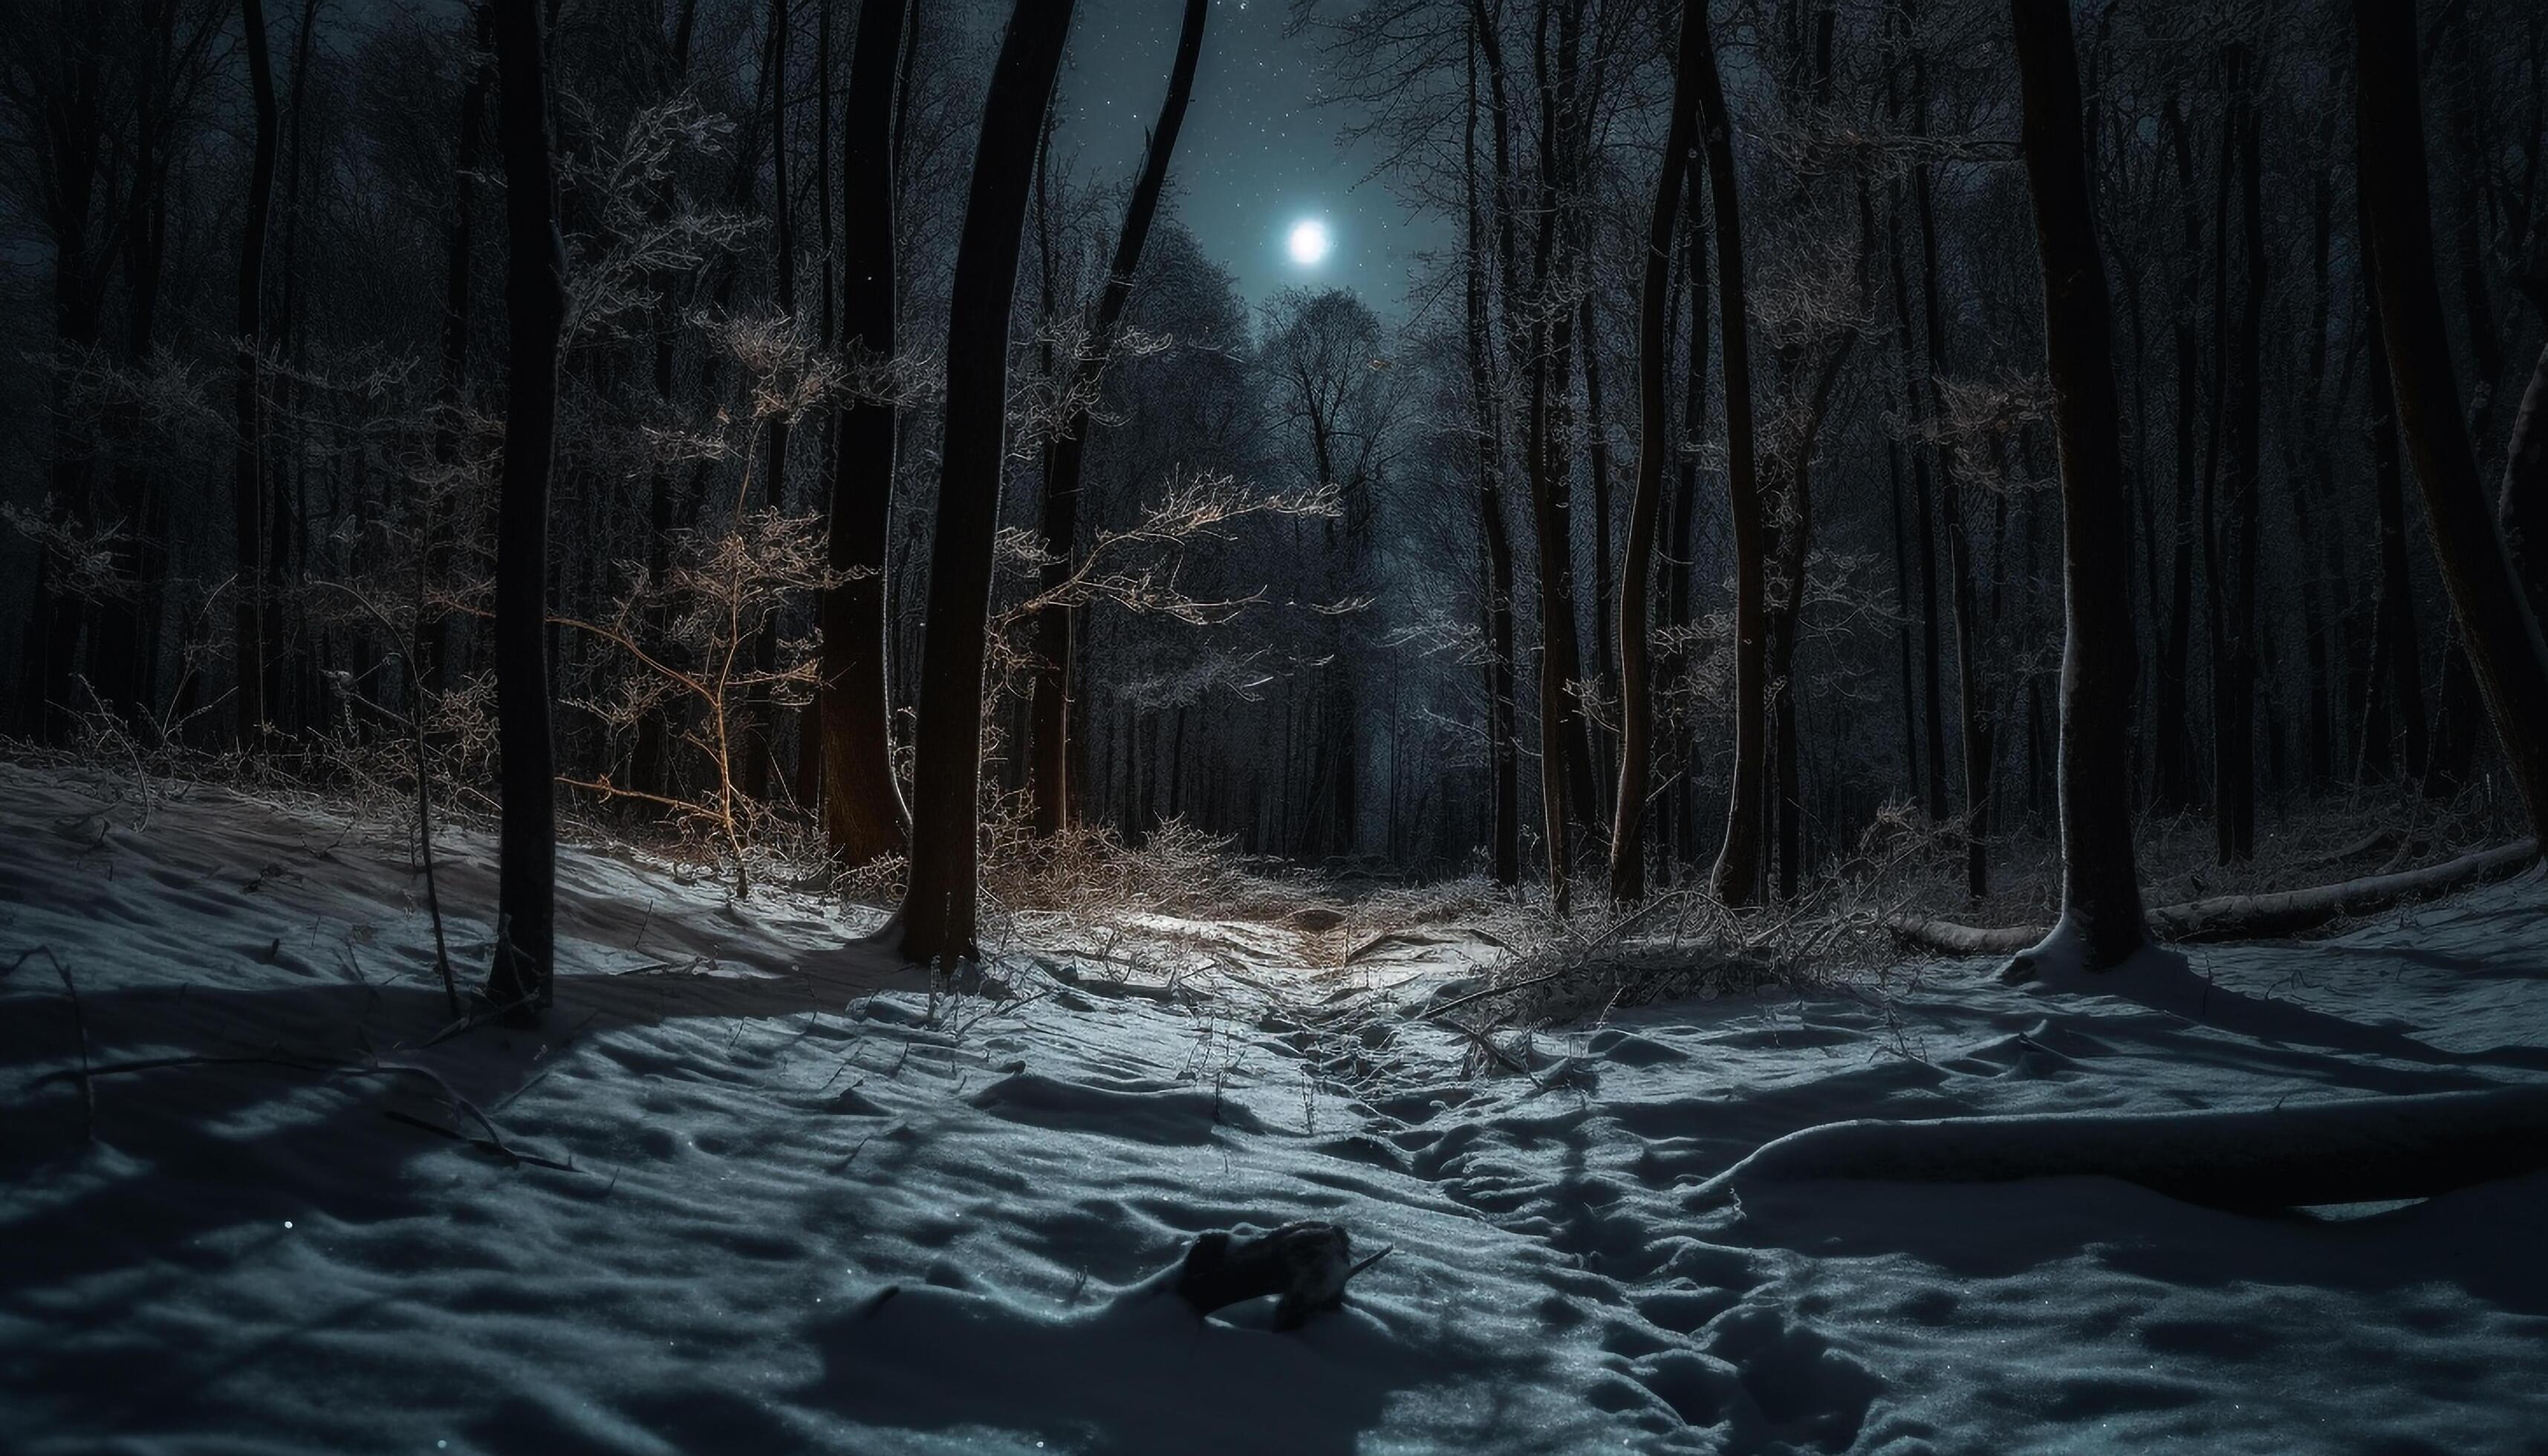 https://static.vecteezy.com/system/resources/previews/024/790/814/large_2x/mystery-of-the-spooky-winter-night-forest-generated-by-ai-free-photo.jpg